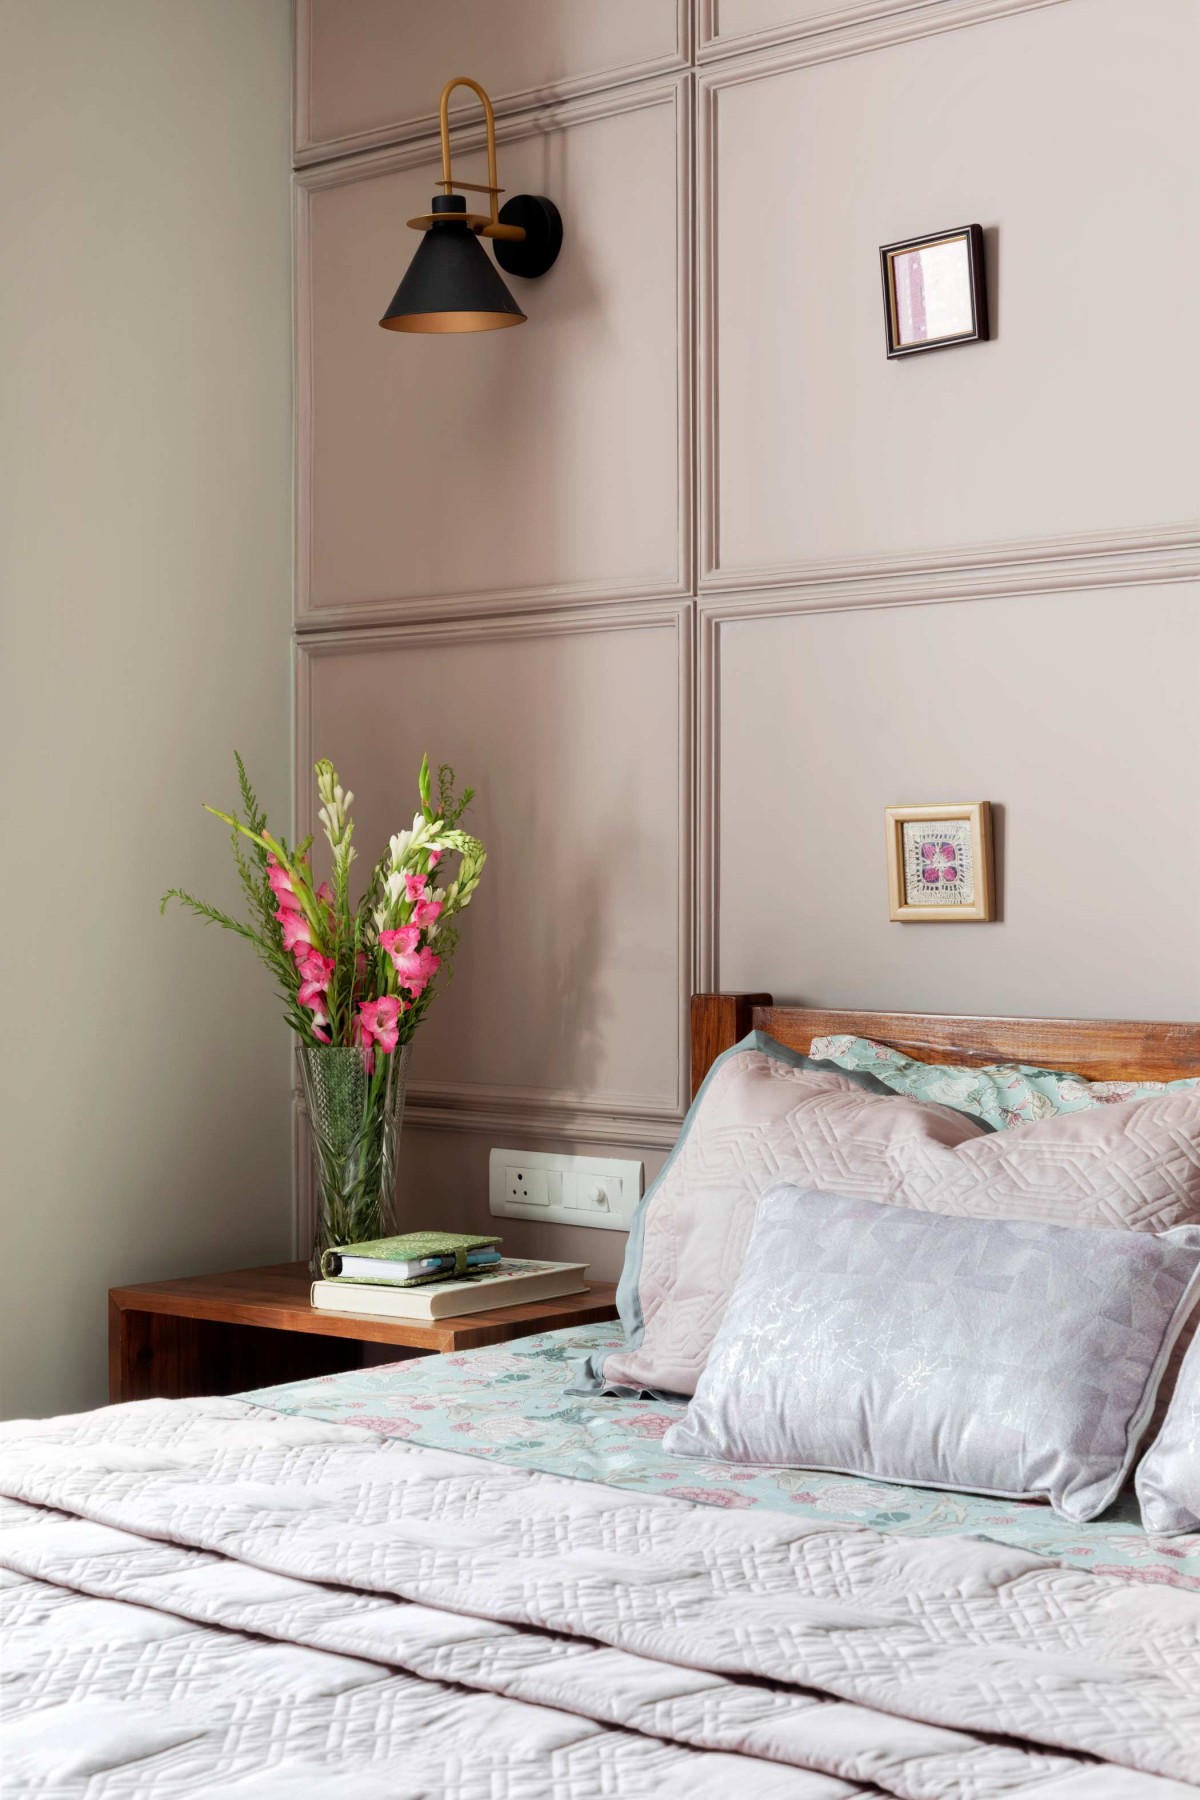 Bedroom 2 of Contemporary Flair by Phrasing Spaces